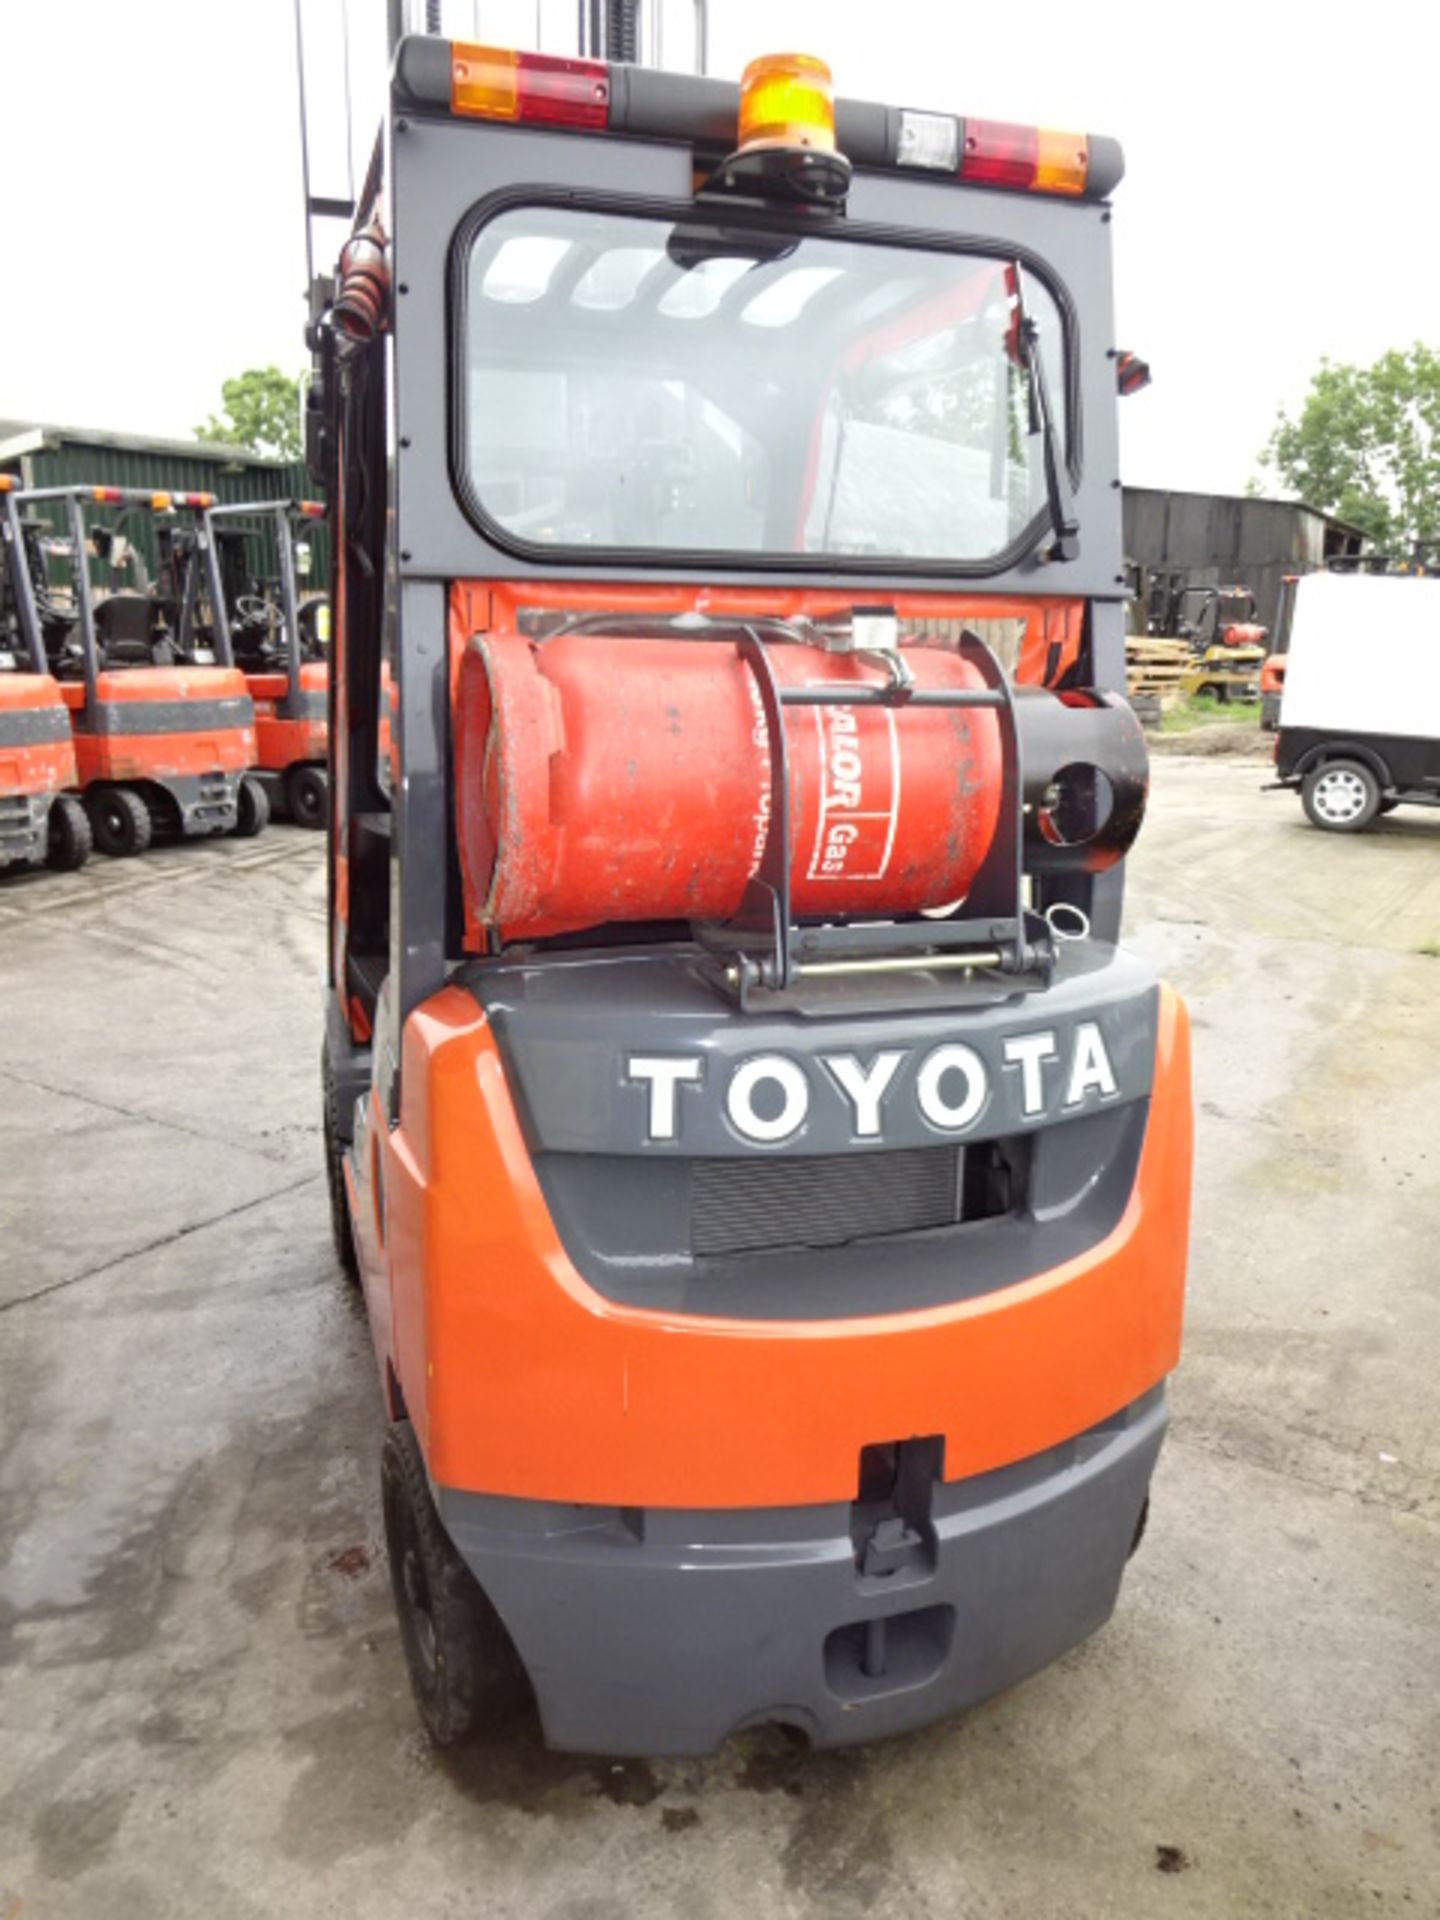 2013 TOYOTA 8-FGF18 1.8t gas driven forklift truck S/n: E32555 with duplex mast, side-shift & - Image 10 of 10